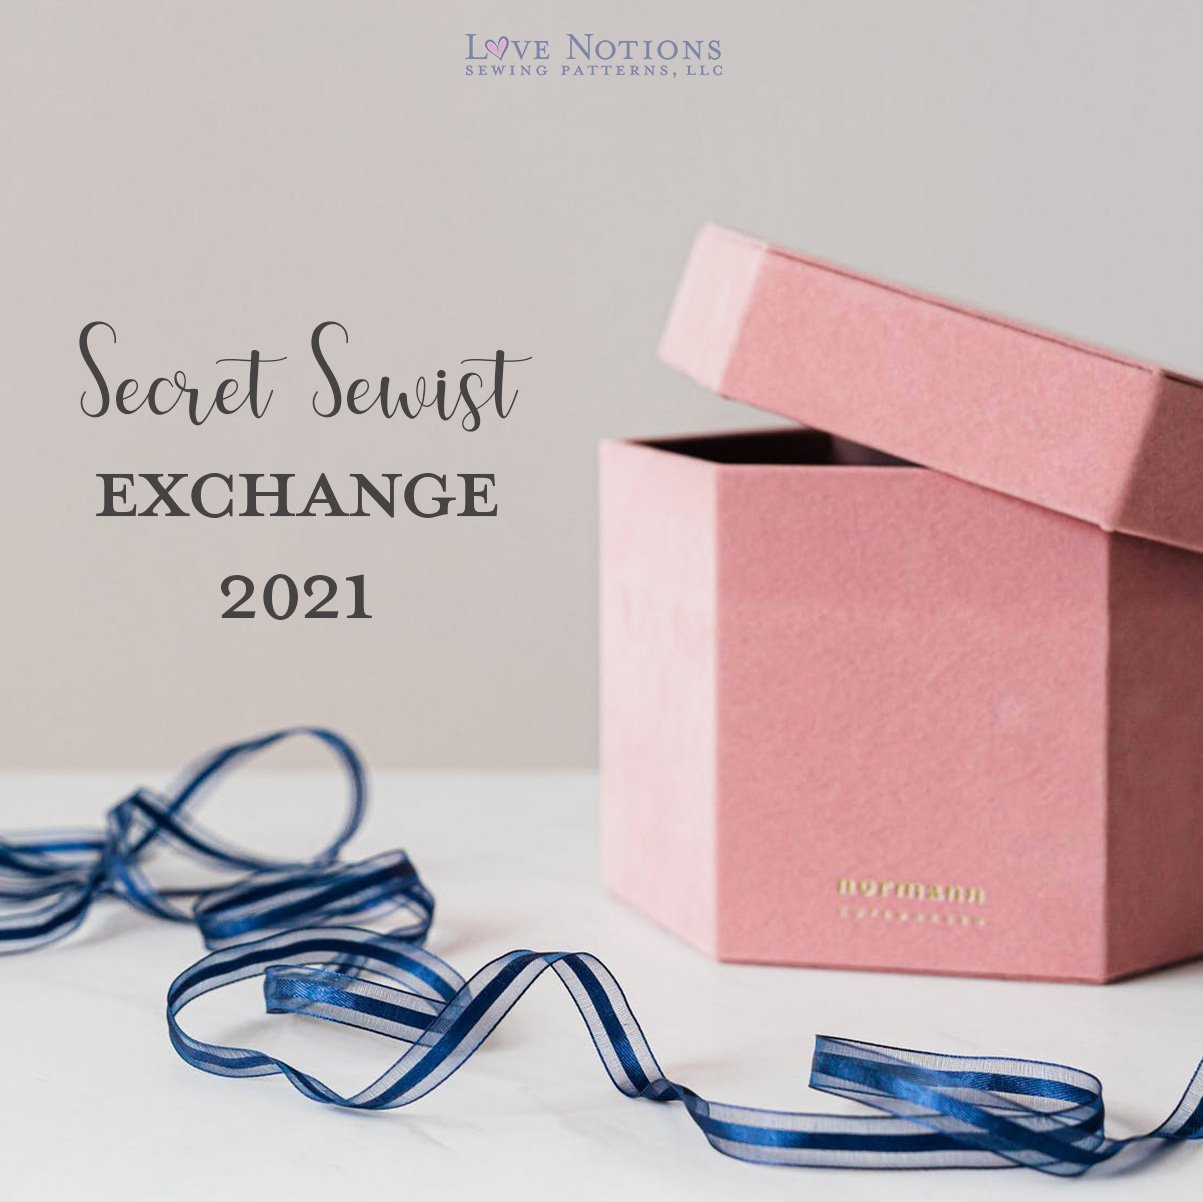 Your Gift Guide for Sewing Notions: plus, Secret Sewists Revealed!